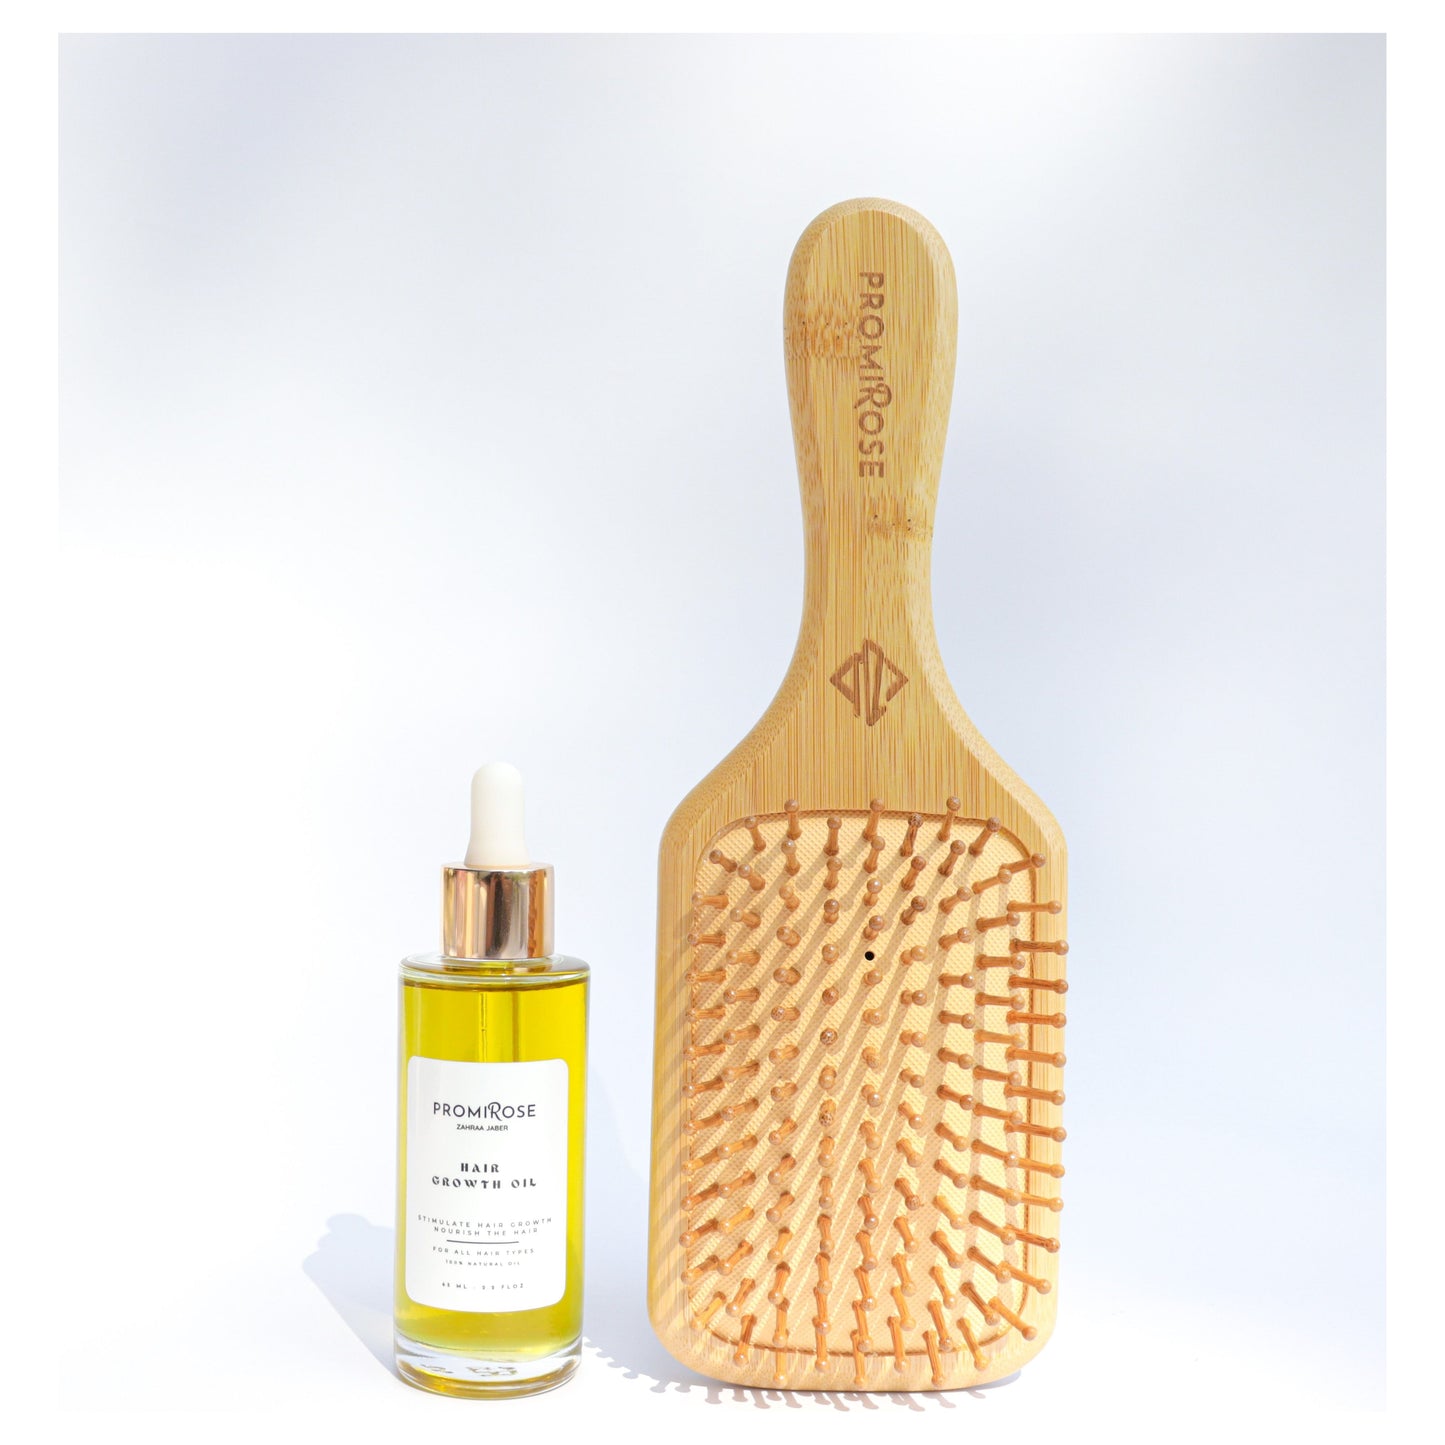 Promirose oil with Bamboo Hair Brush